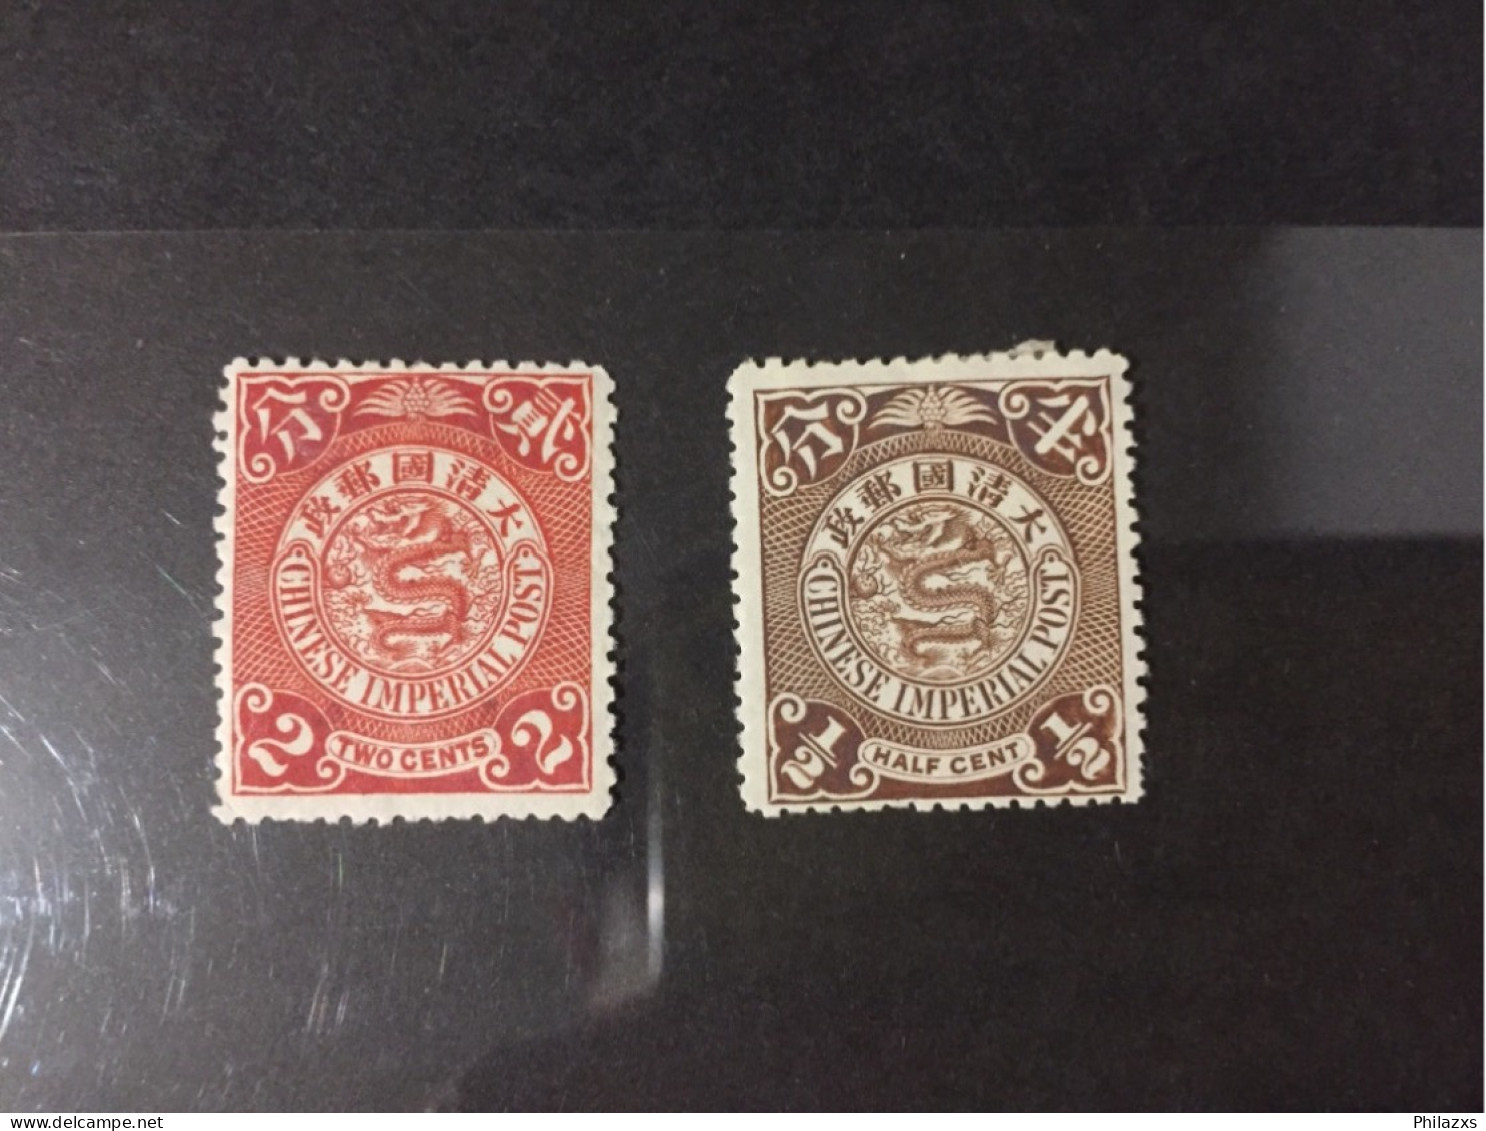 China Dragon Mint - Unused Stamps